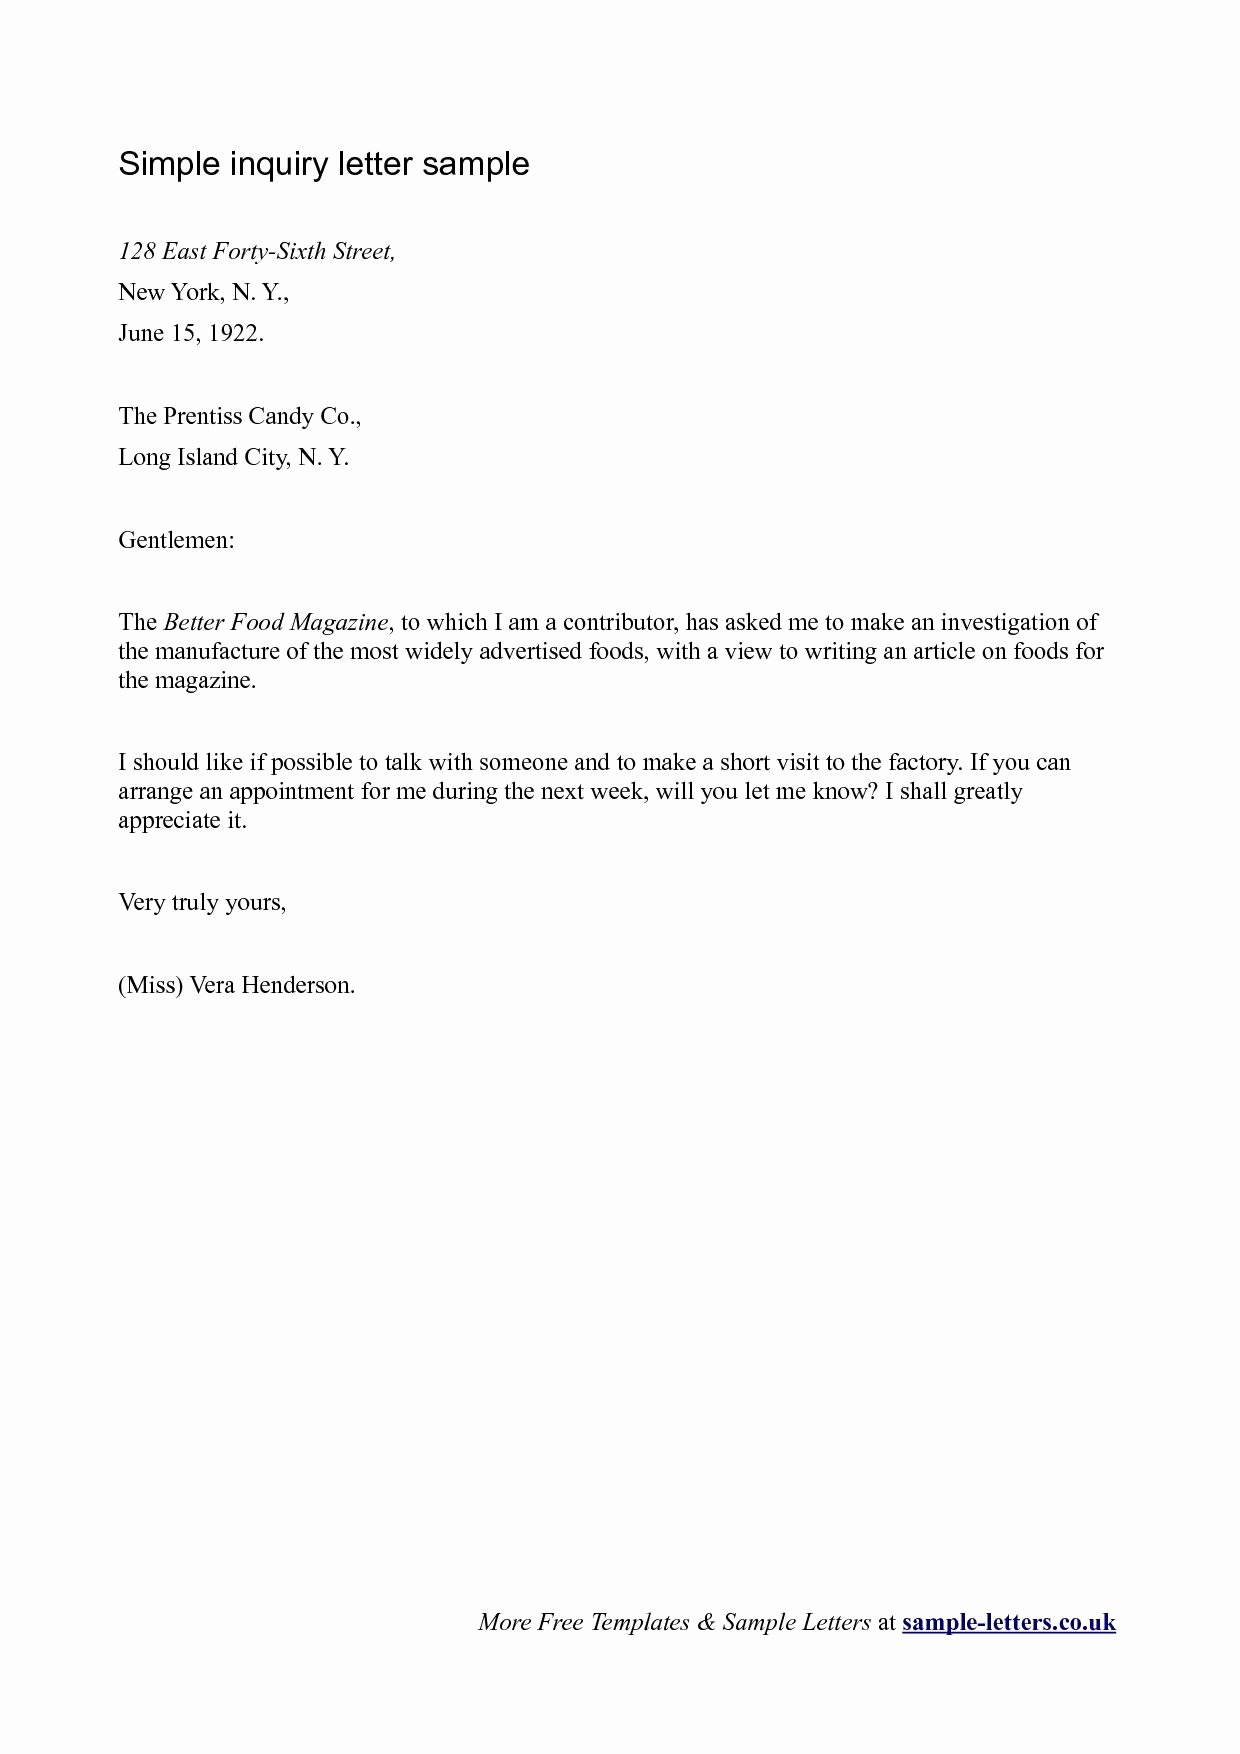 Letter Of Inquiry format Lovely Business Letter Of Inquiry Sample the Letter Sample